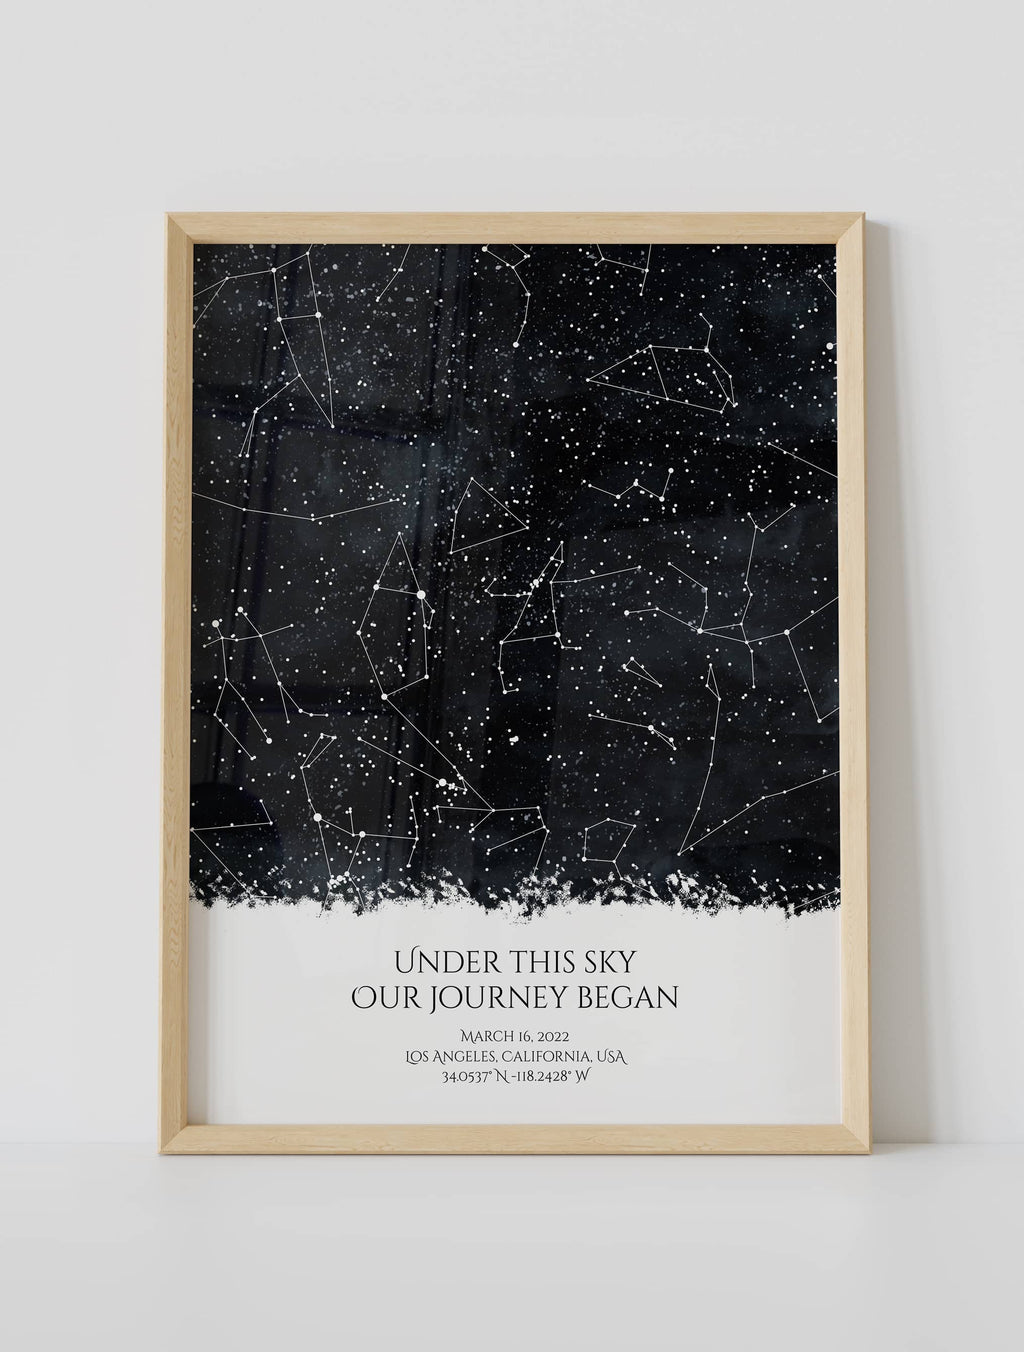  "Our journey began under this sky" Framed star map poster